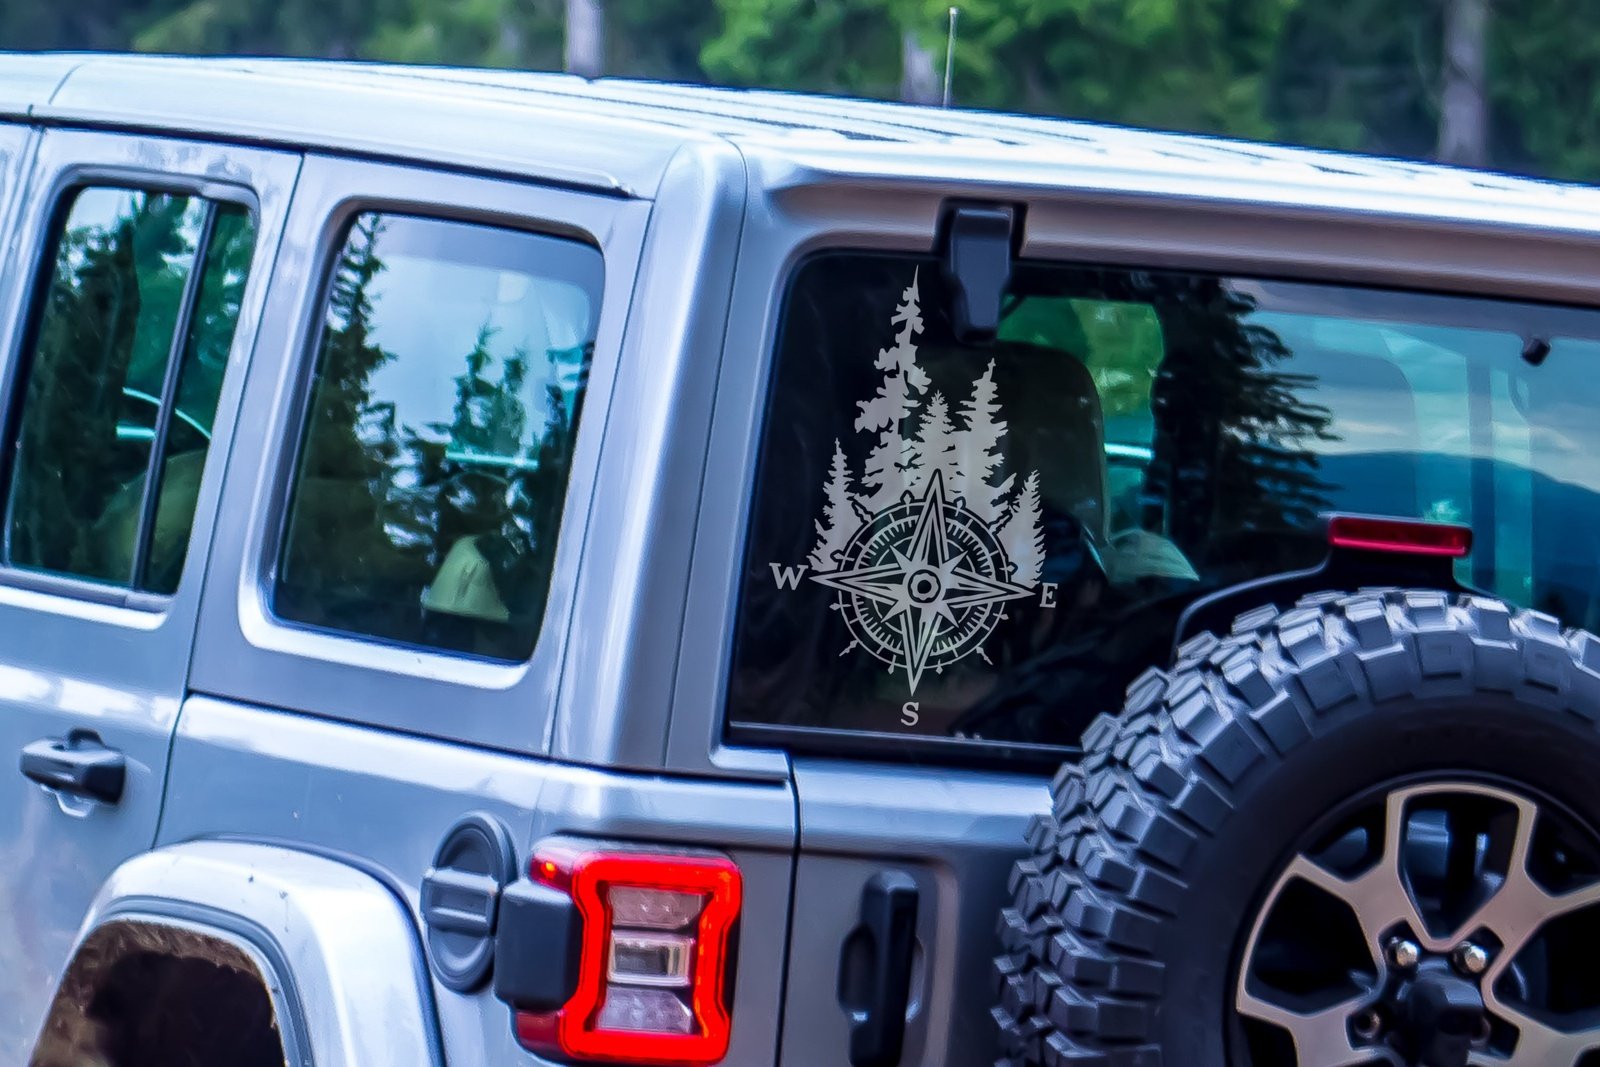 Forest Compass Rose Vinyl Decal | 278